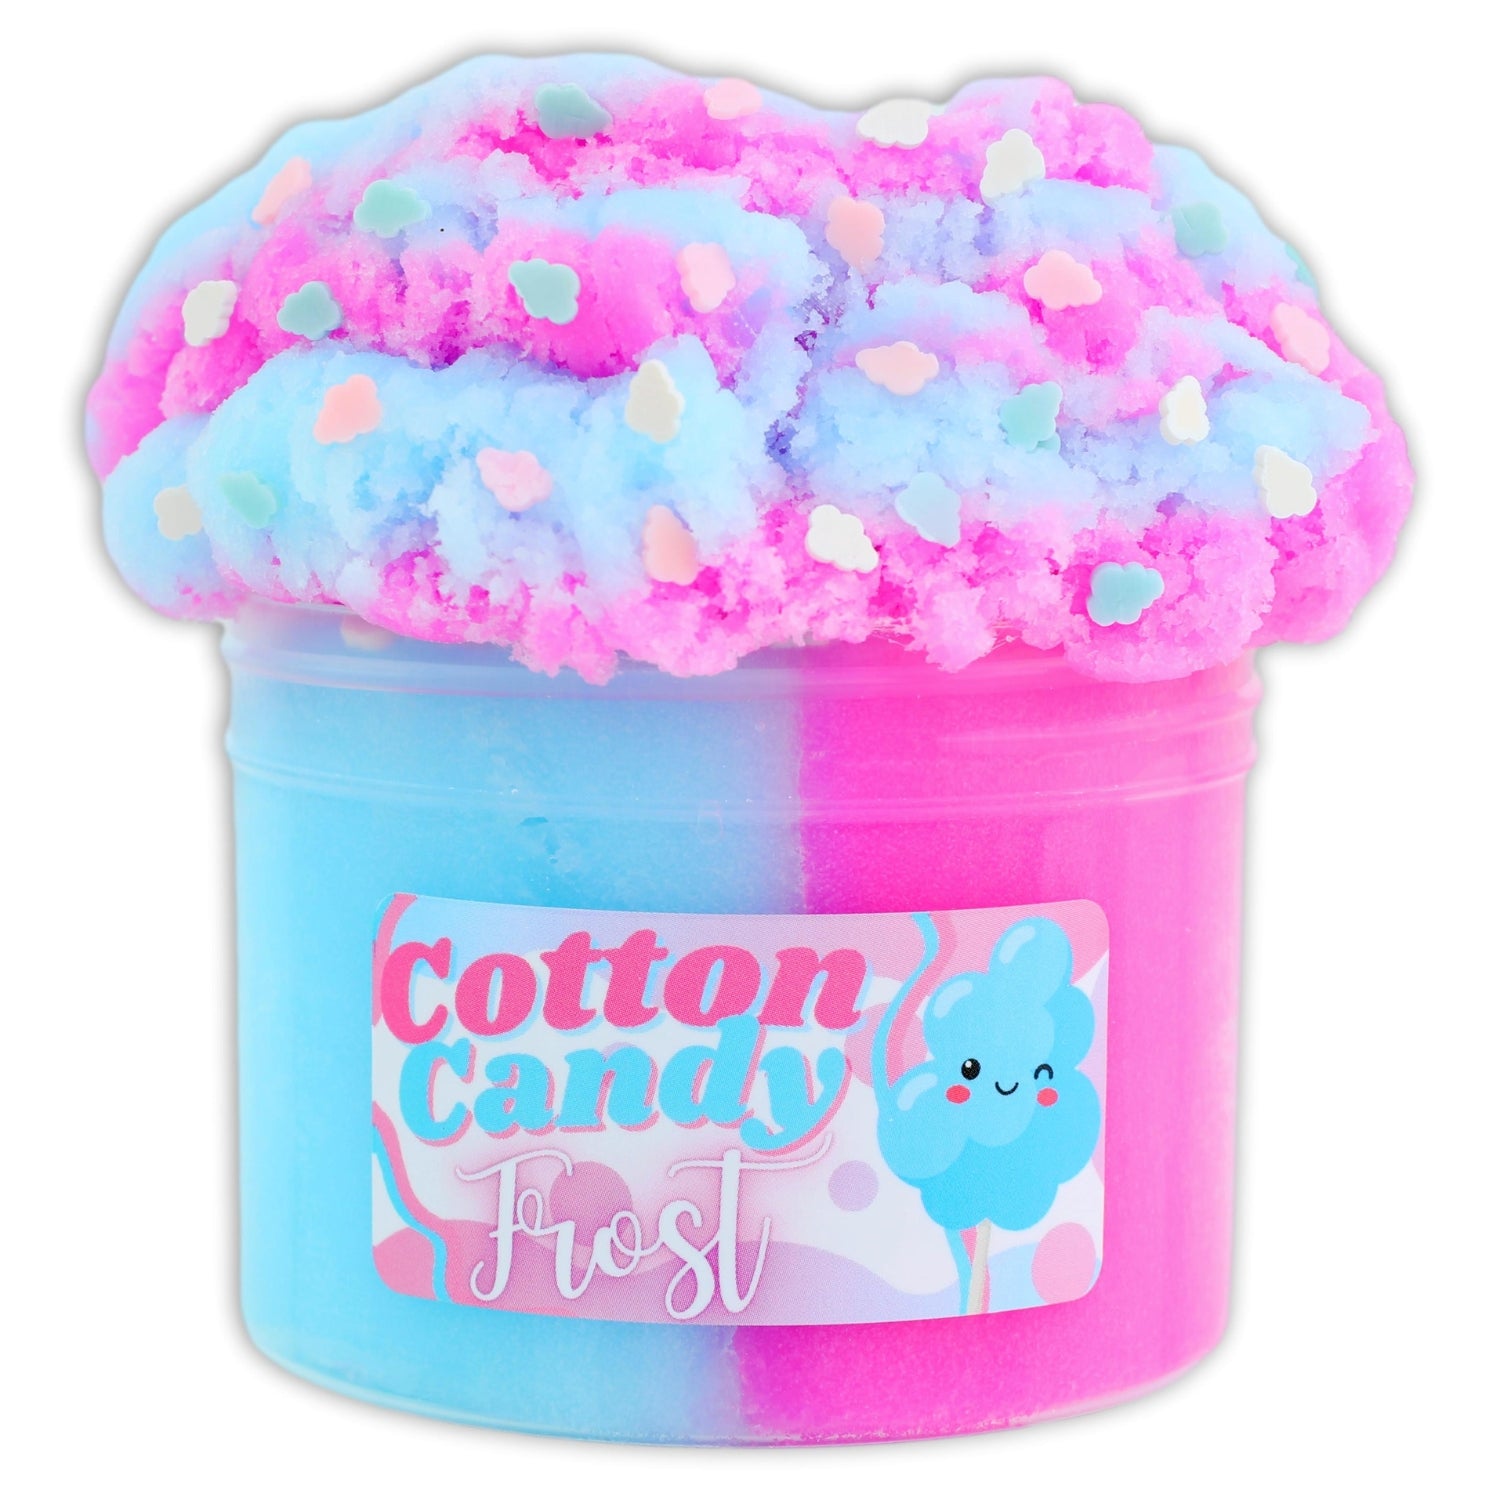 Cotton Candy Frost - Wholesale Case of 18